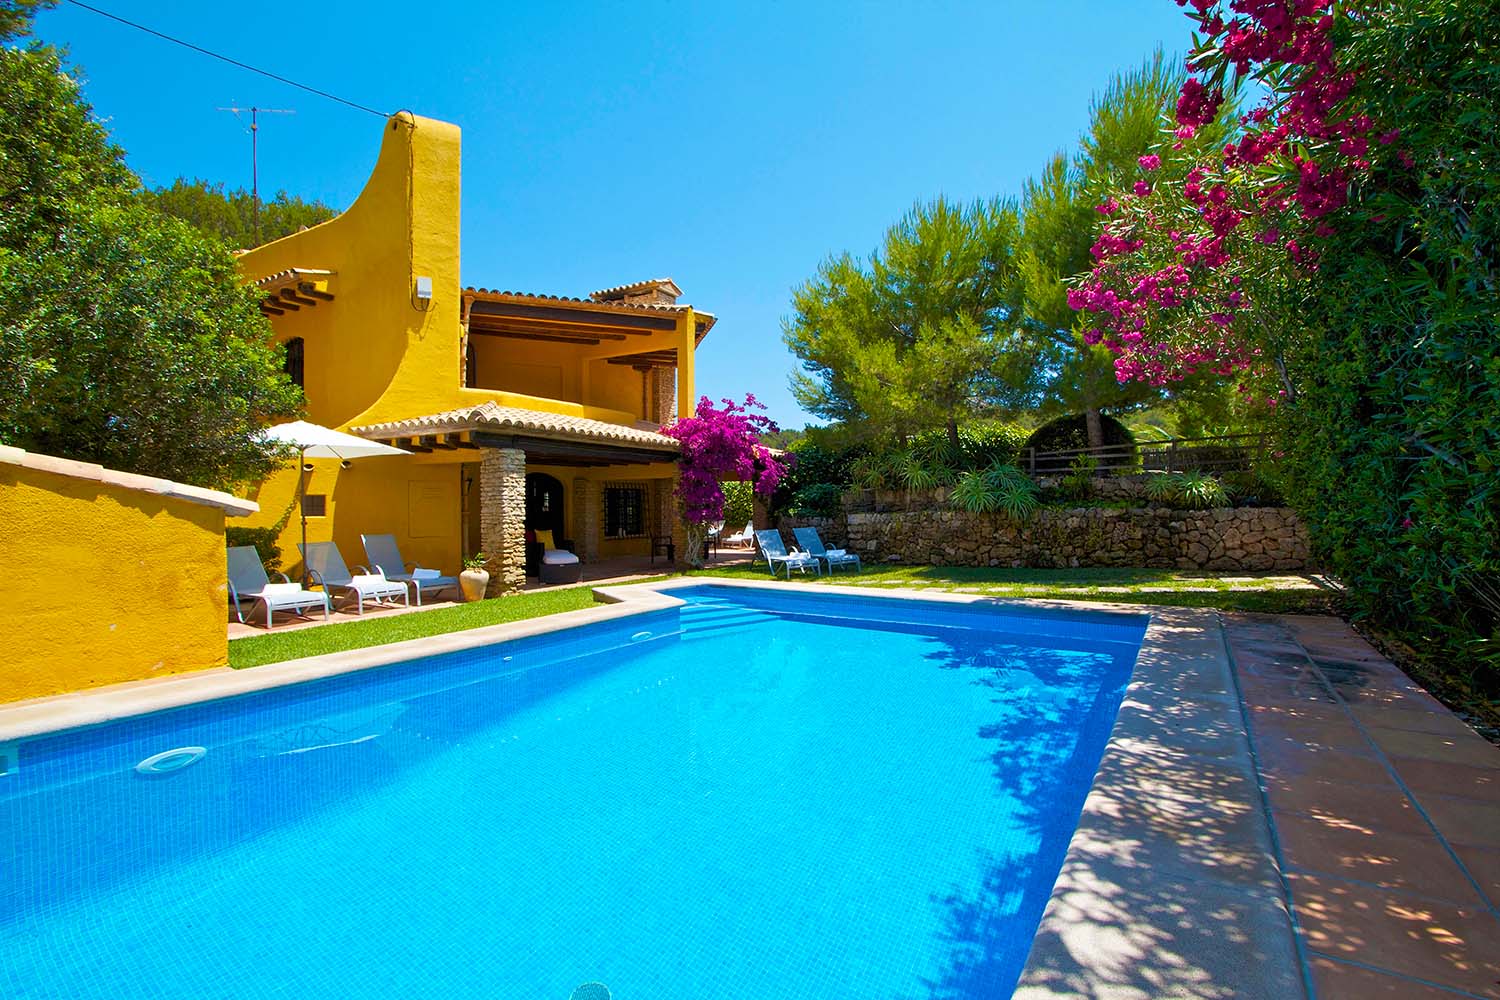 Bell reco is a cozy villa close to the beach in Cala San Vicente